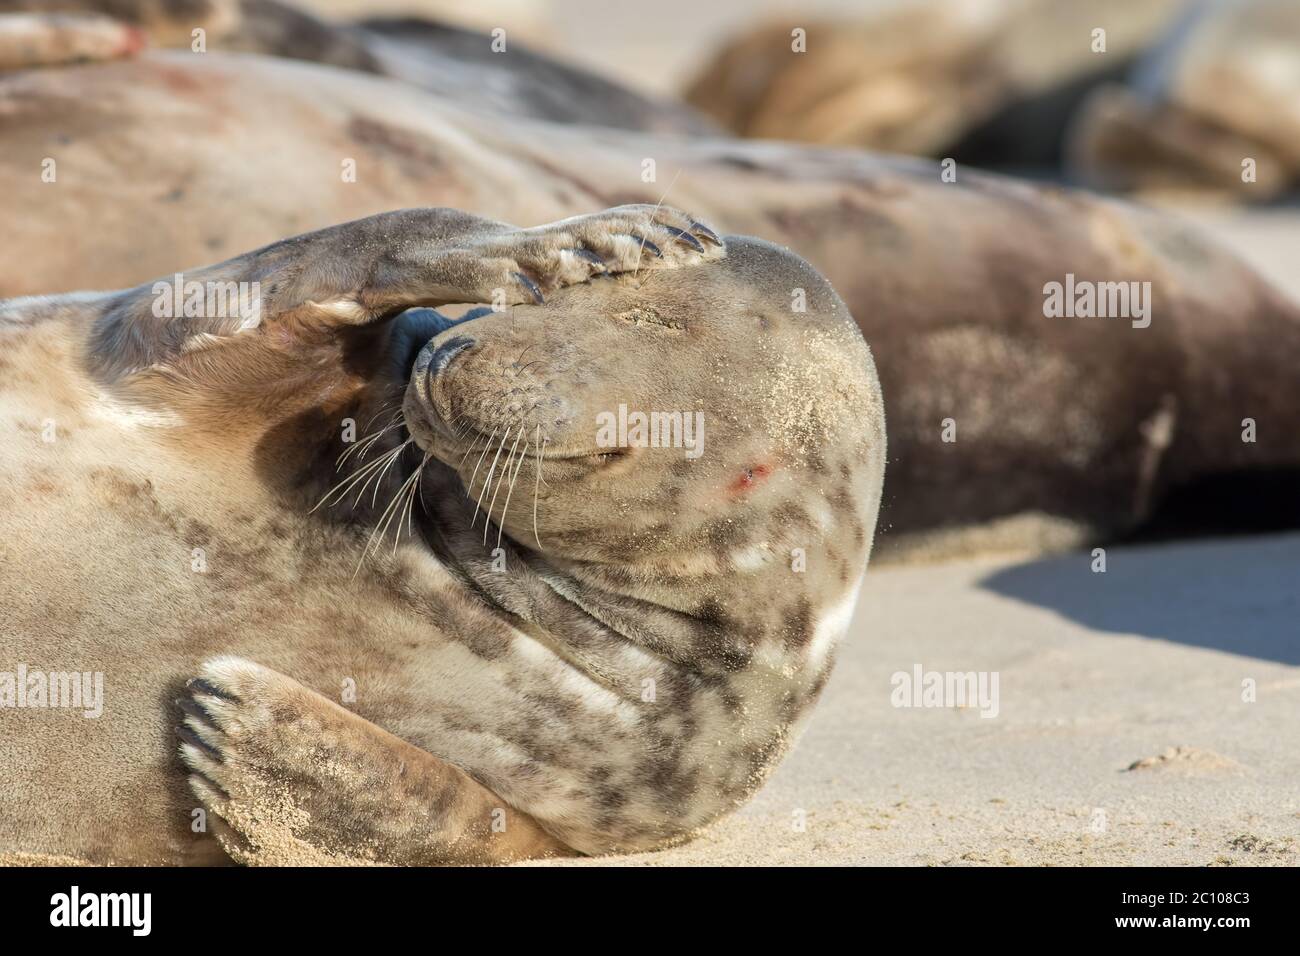 Headache stress. Cute seal with a hangover. Funny animal meme image of a wild grey seal holding its head. Party animal the morning after the night bef Stock Photo